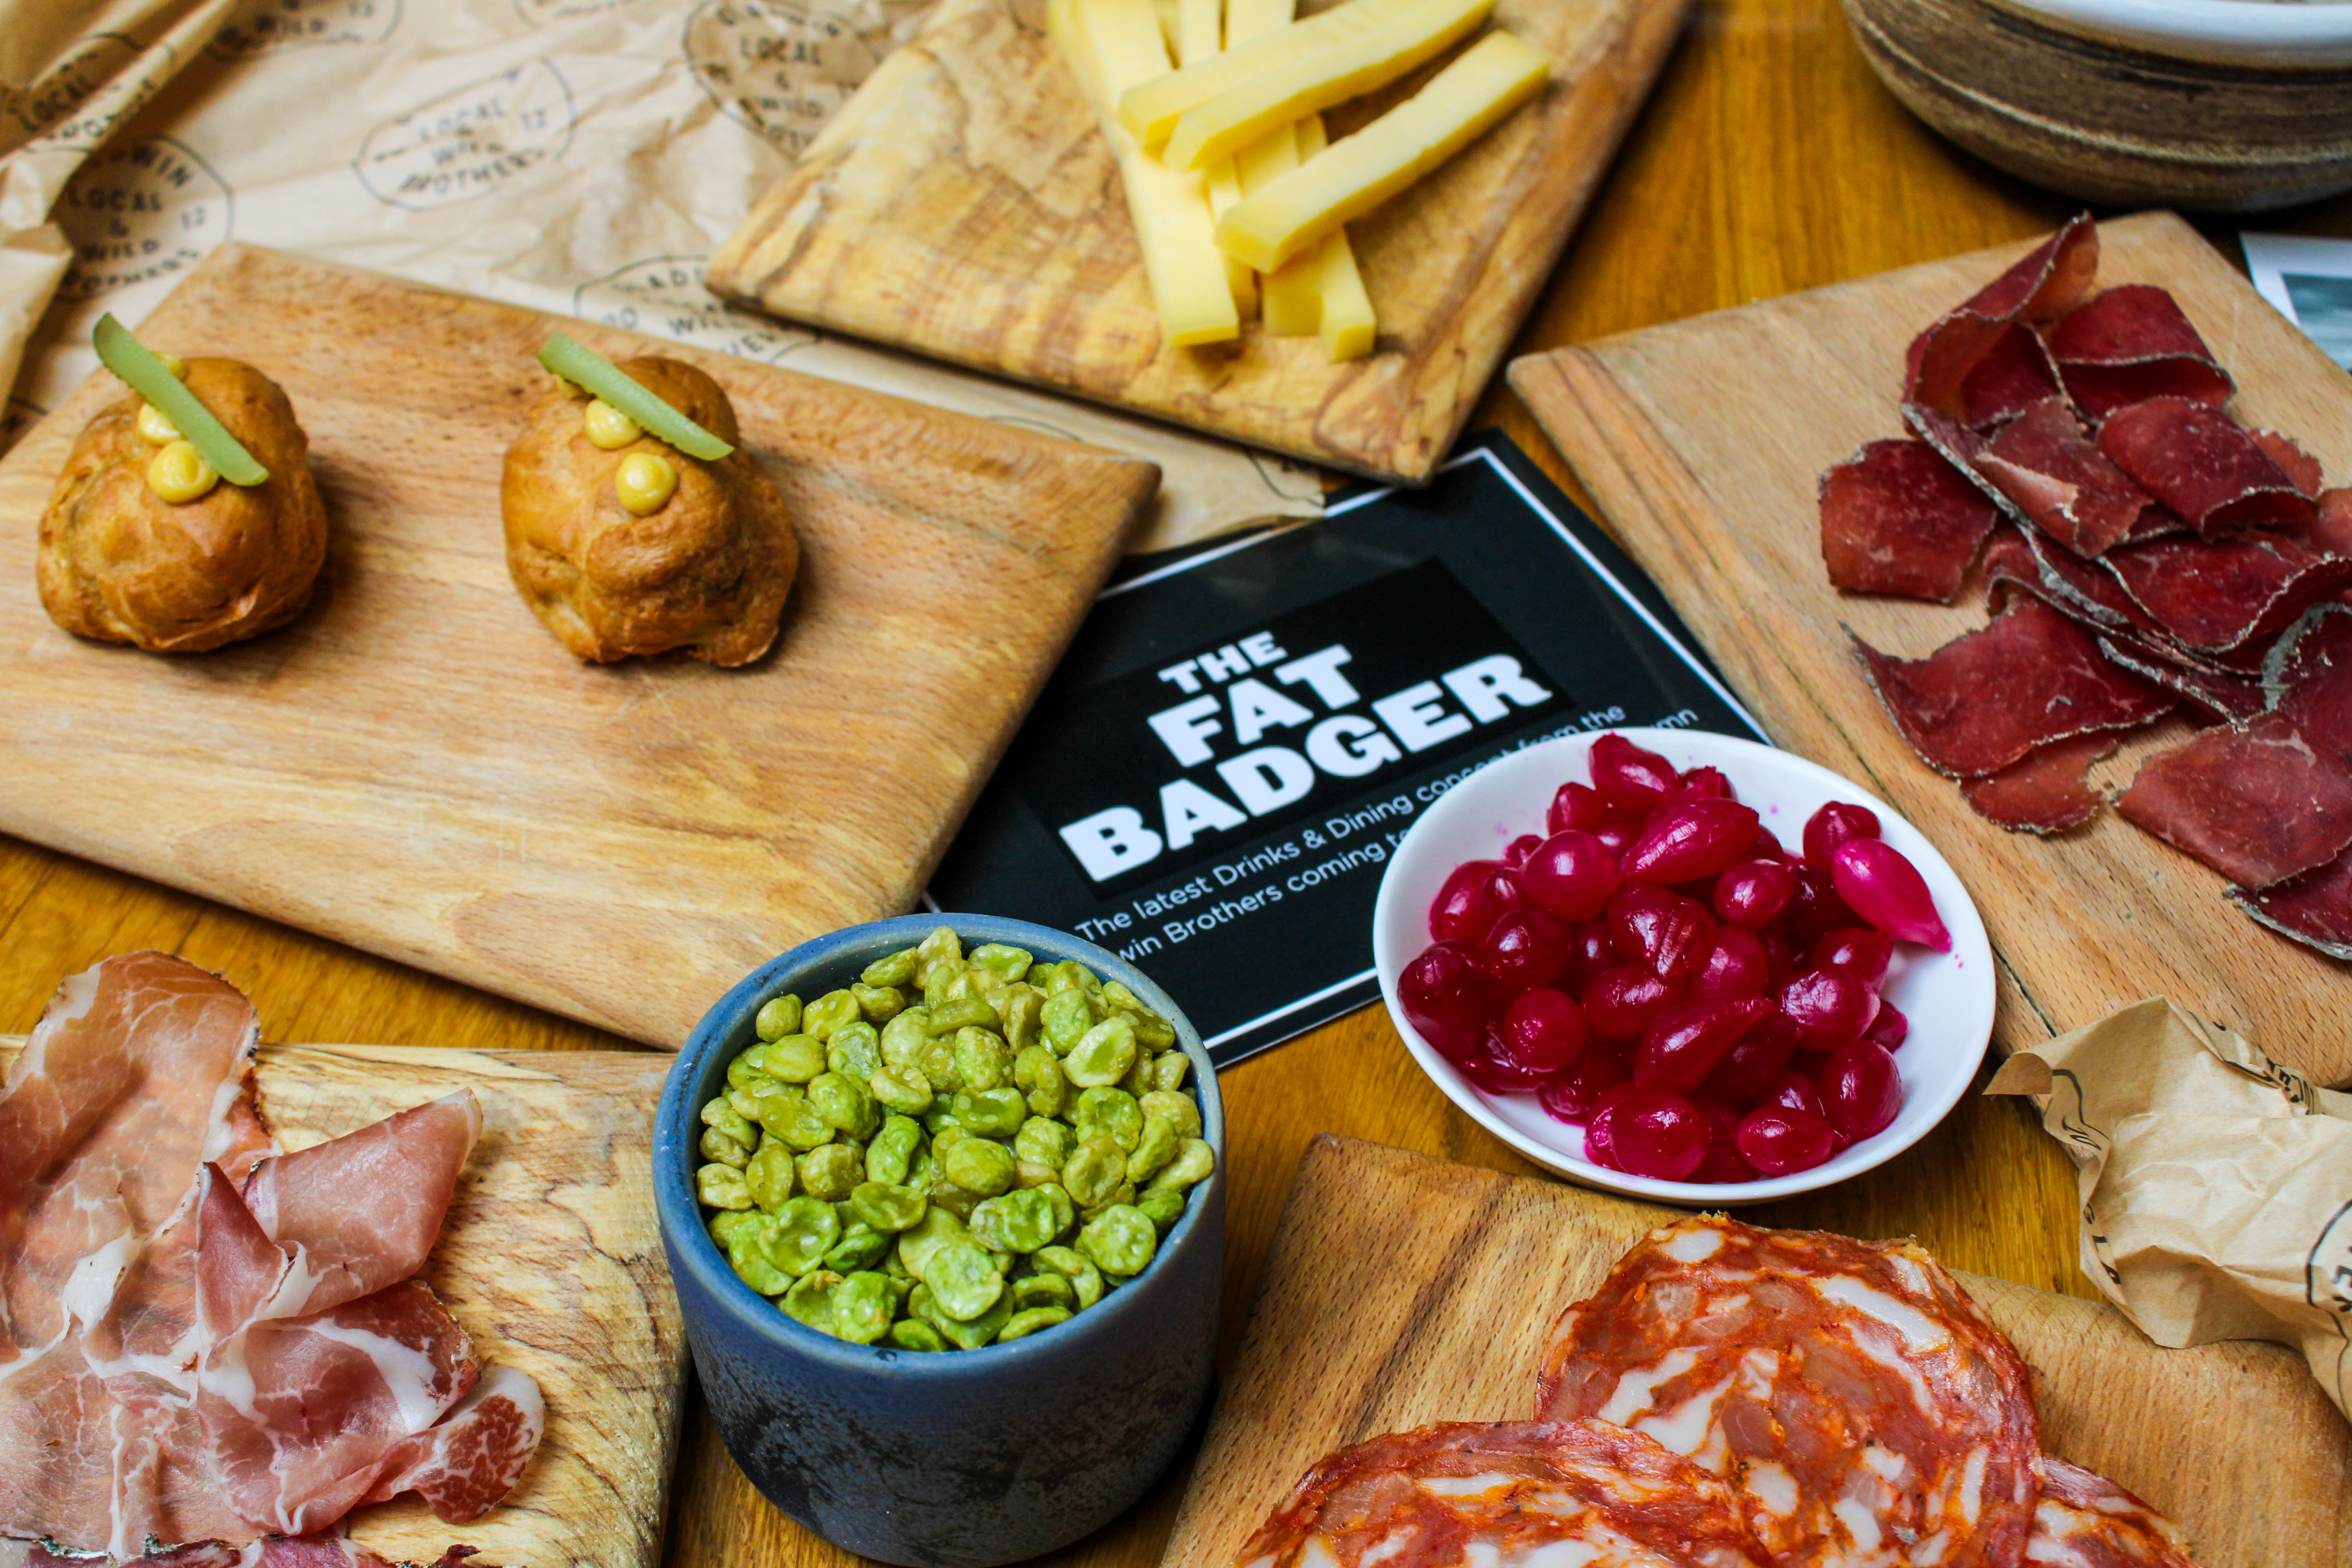 The Fat Badger charcuterie spread